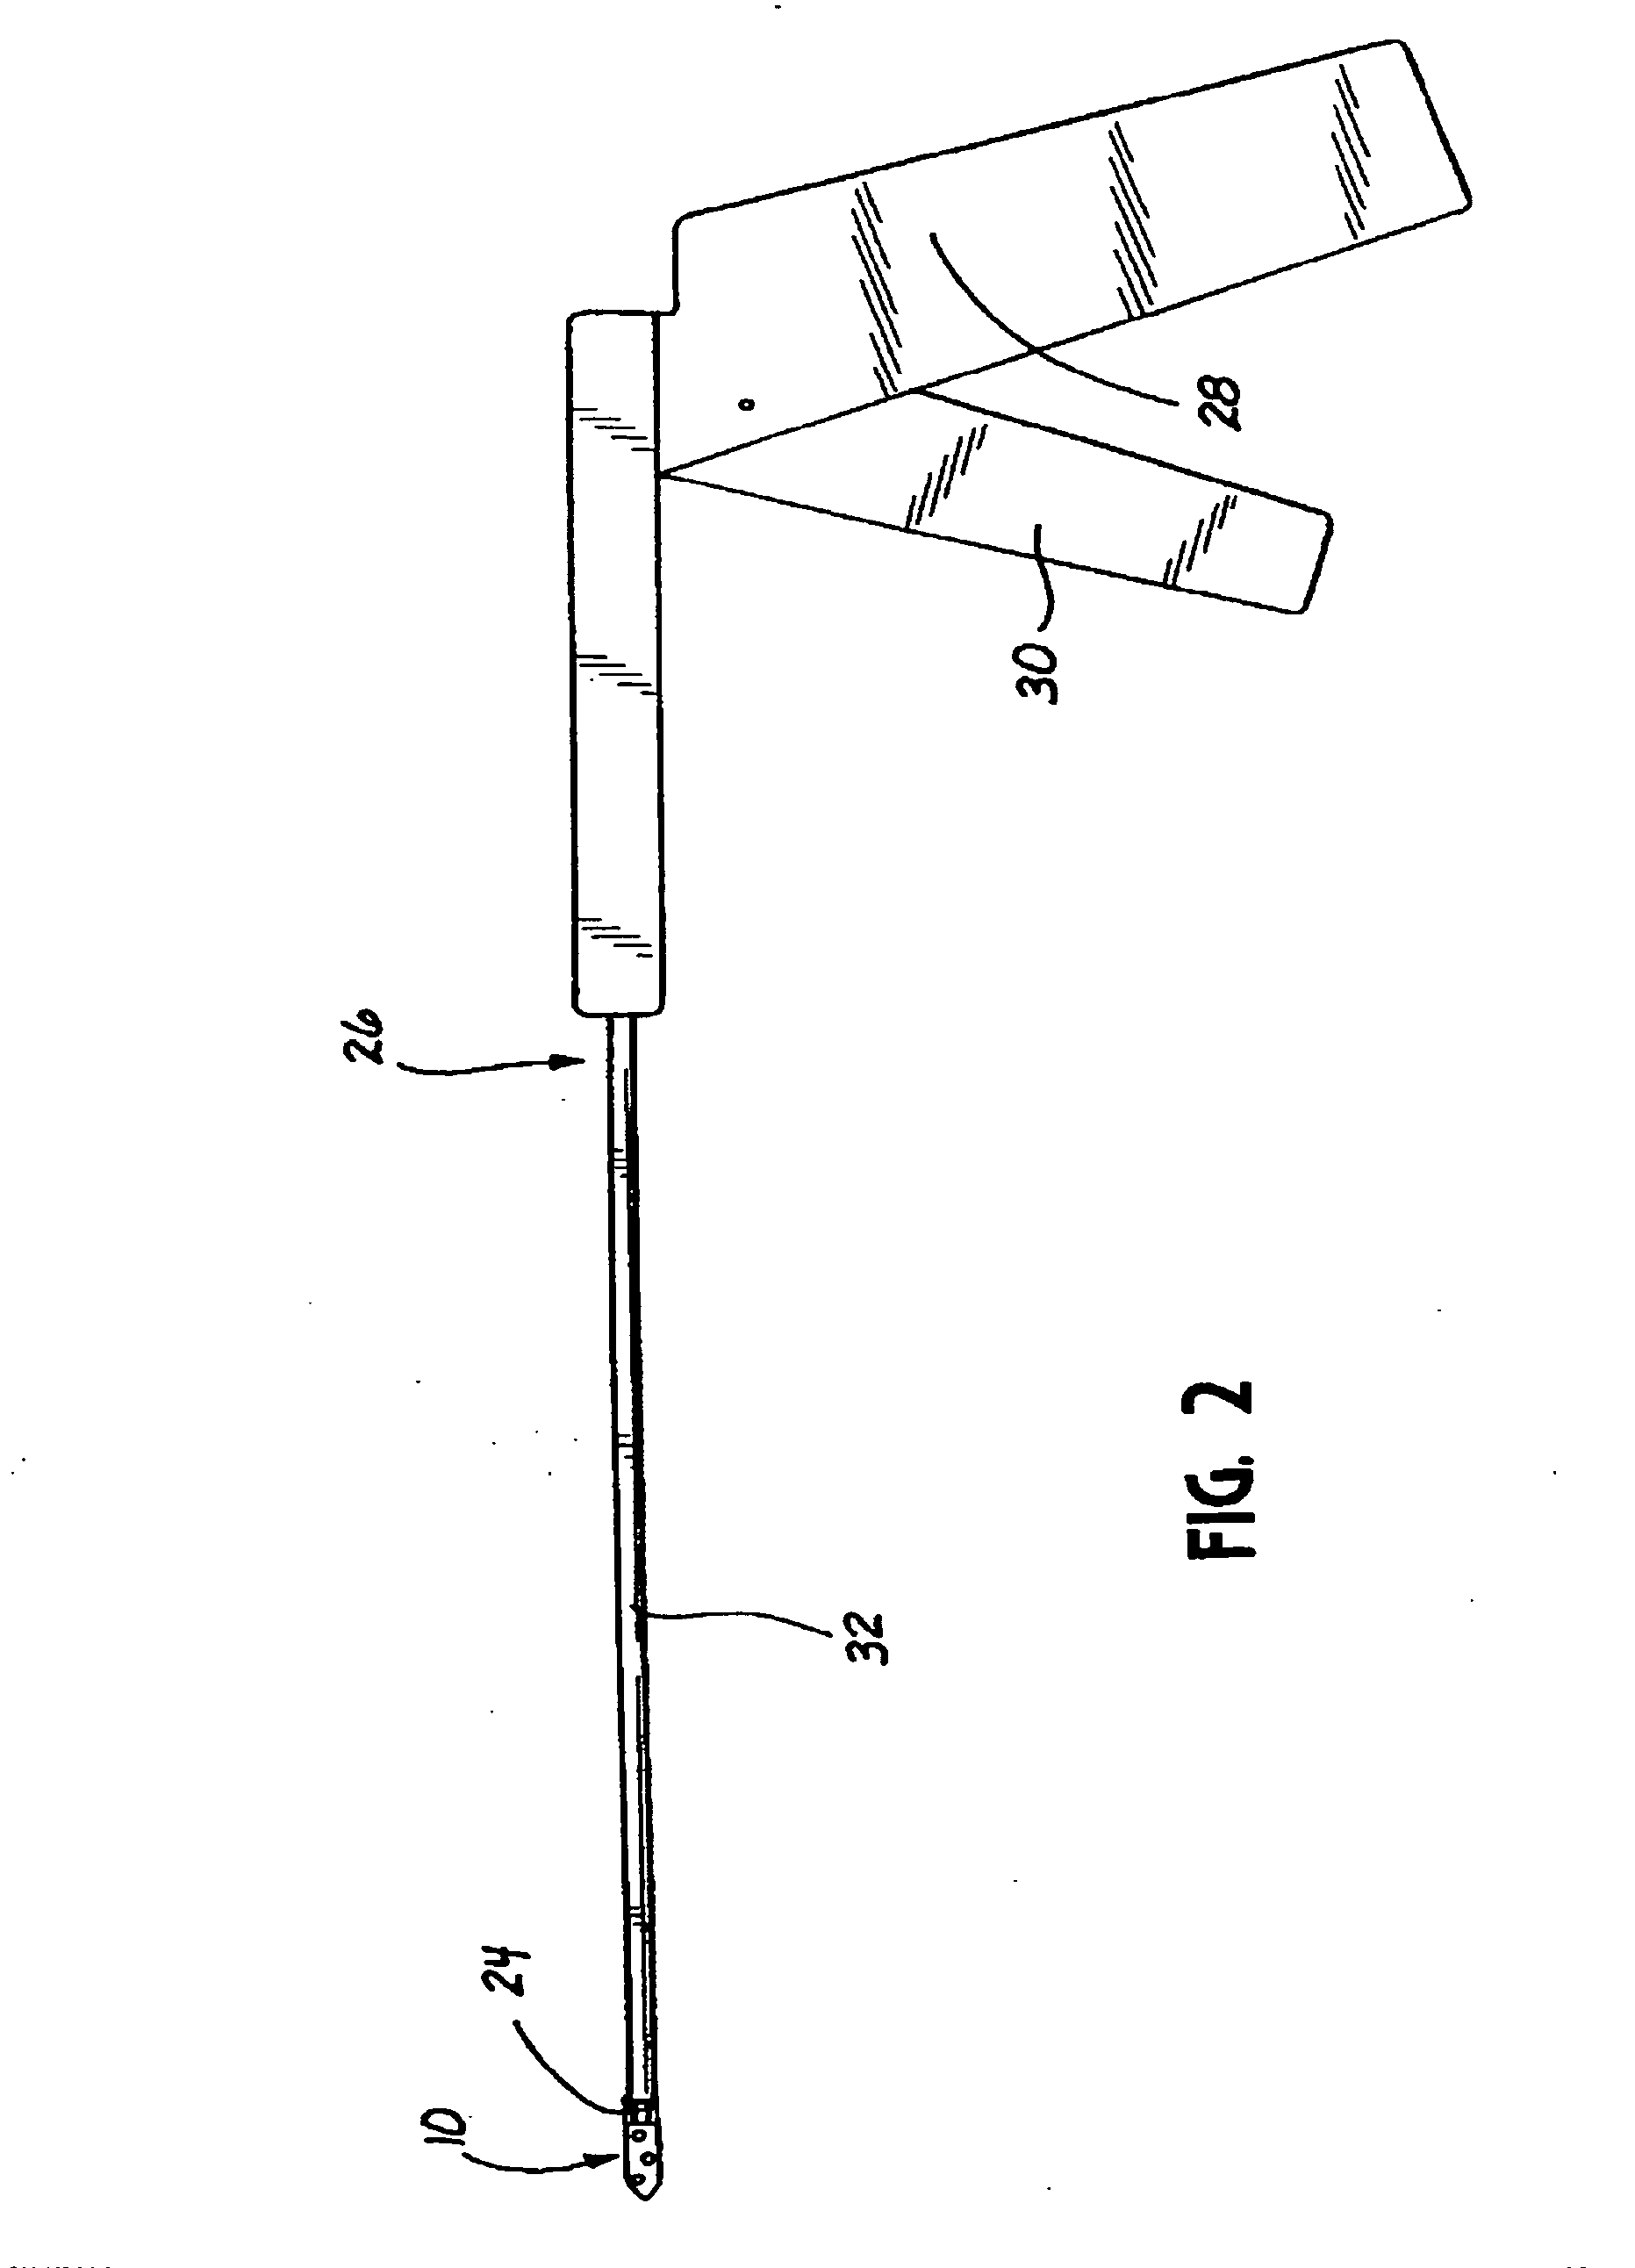 Knotless suture lock and bone anchor implant method